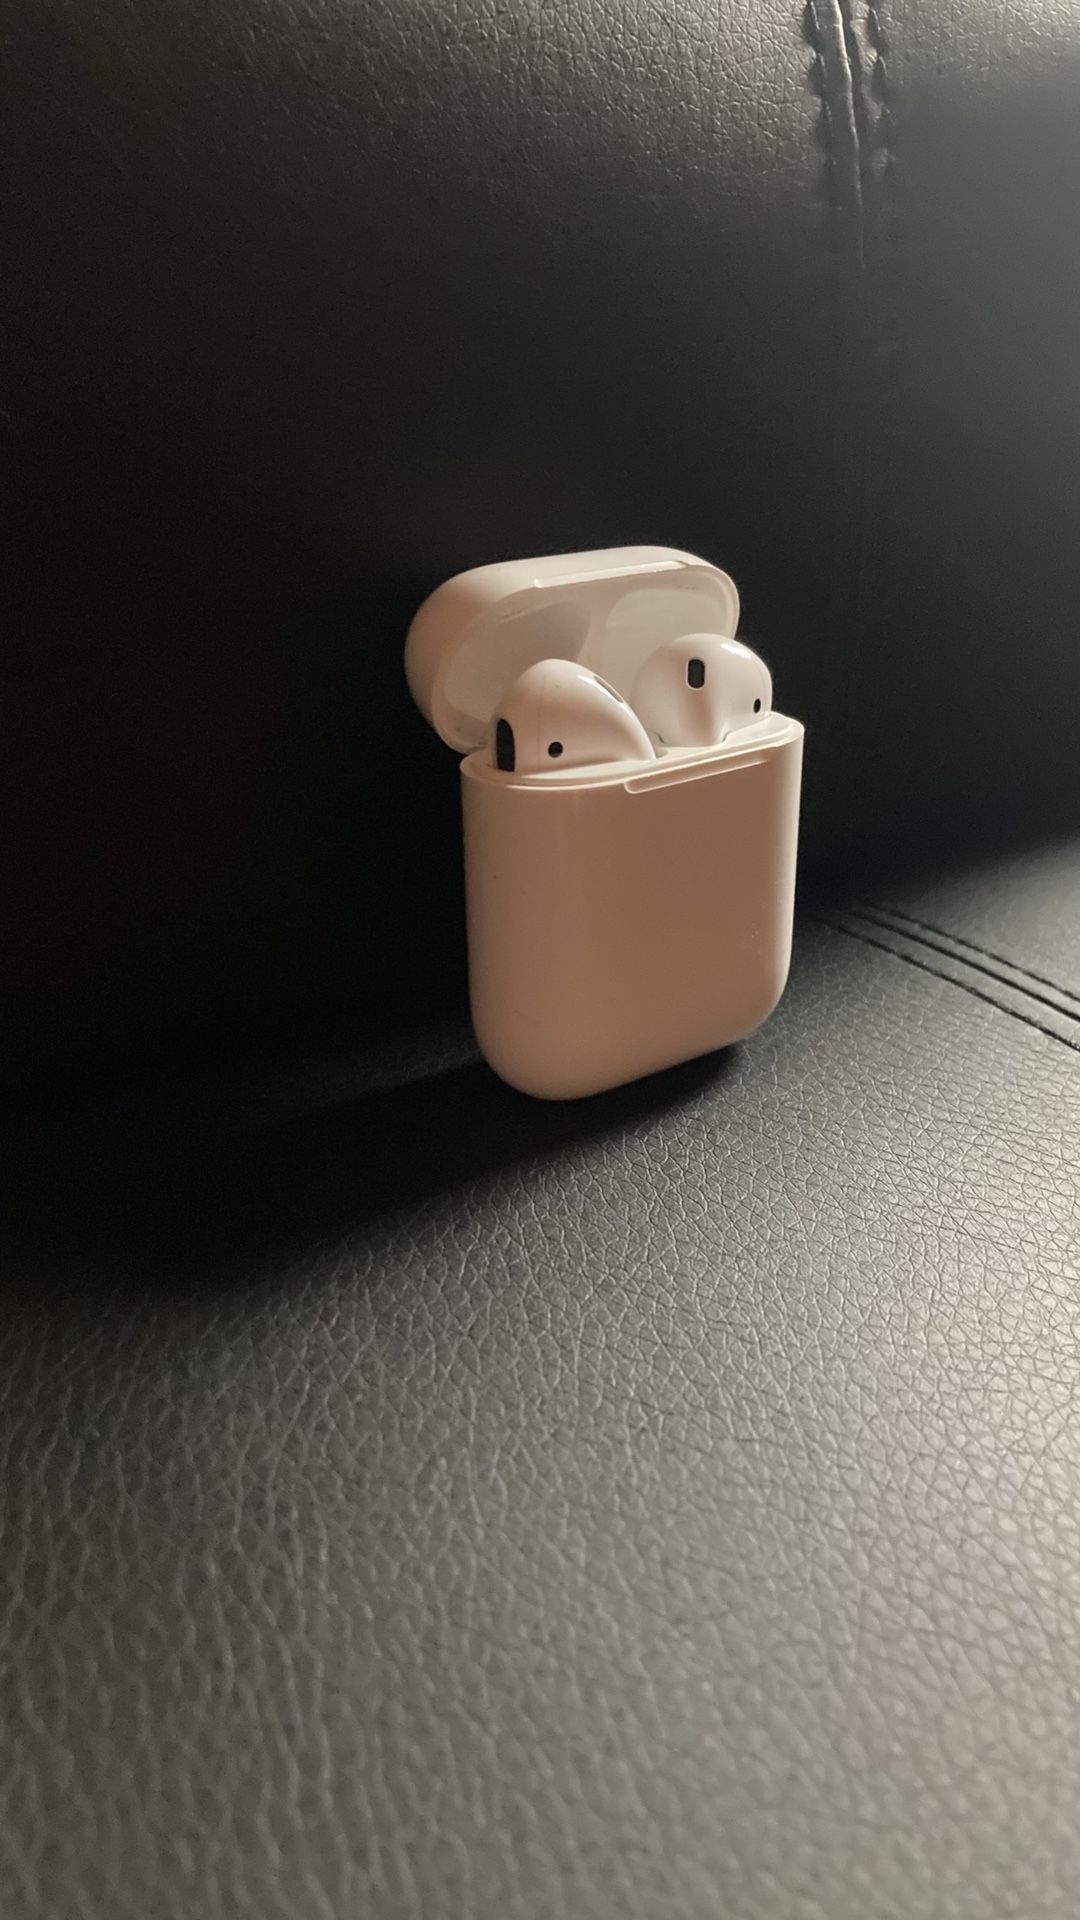 Apple AirPods 1st Generation Wired Charging